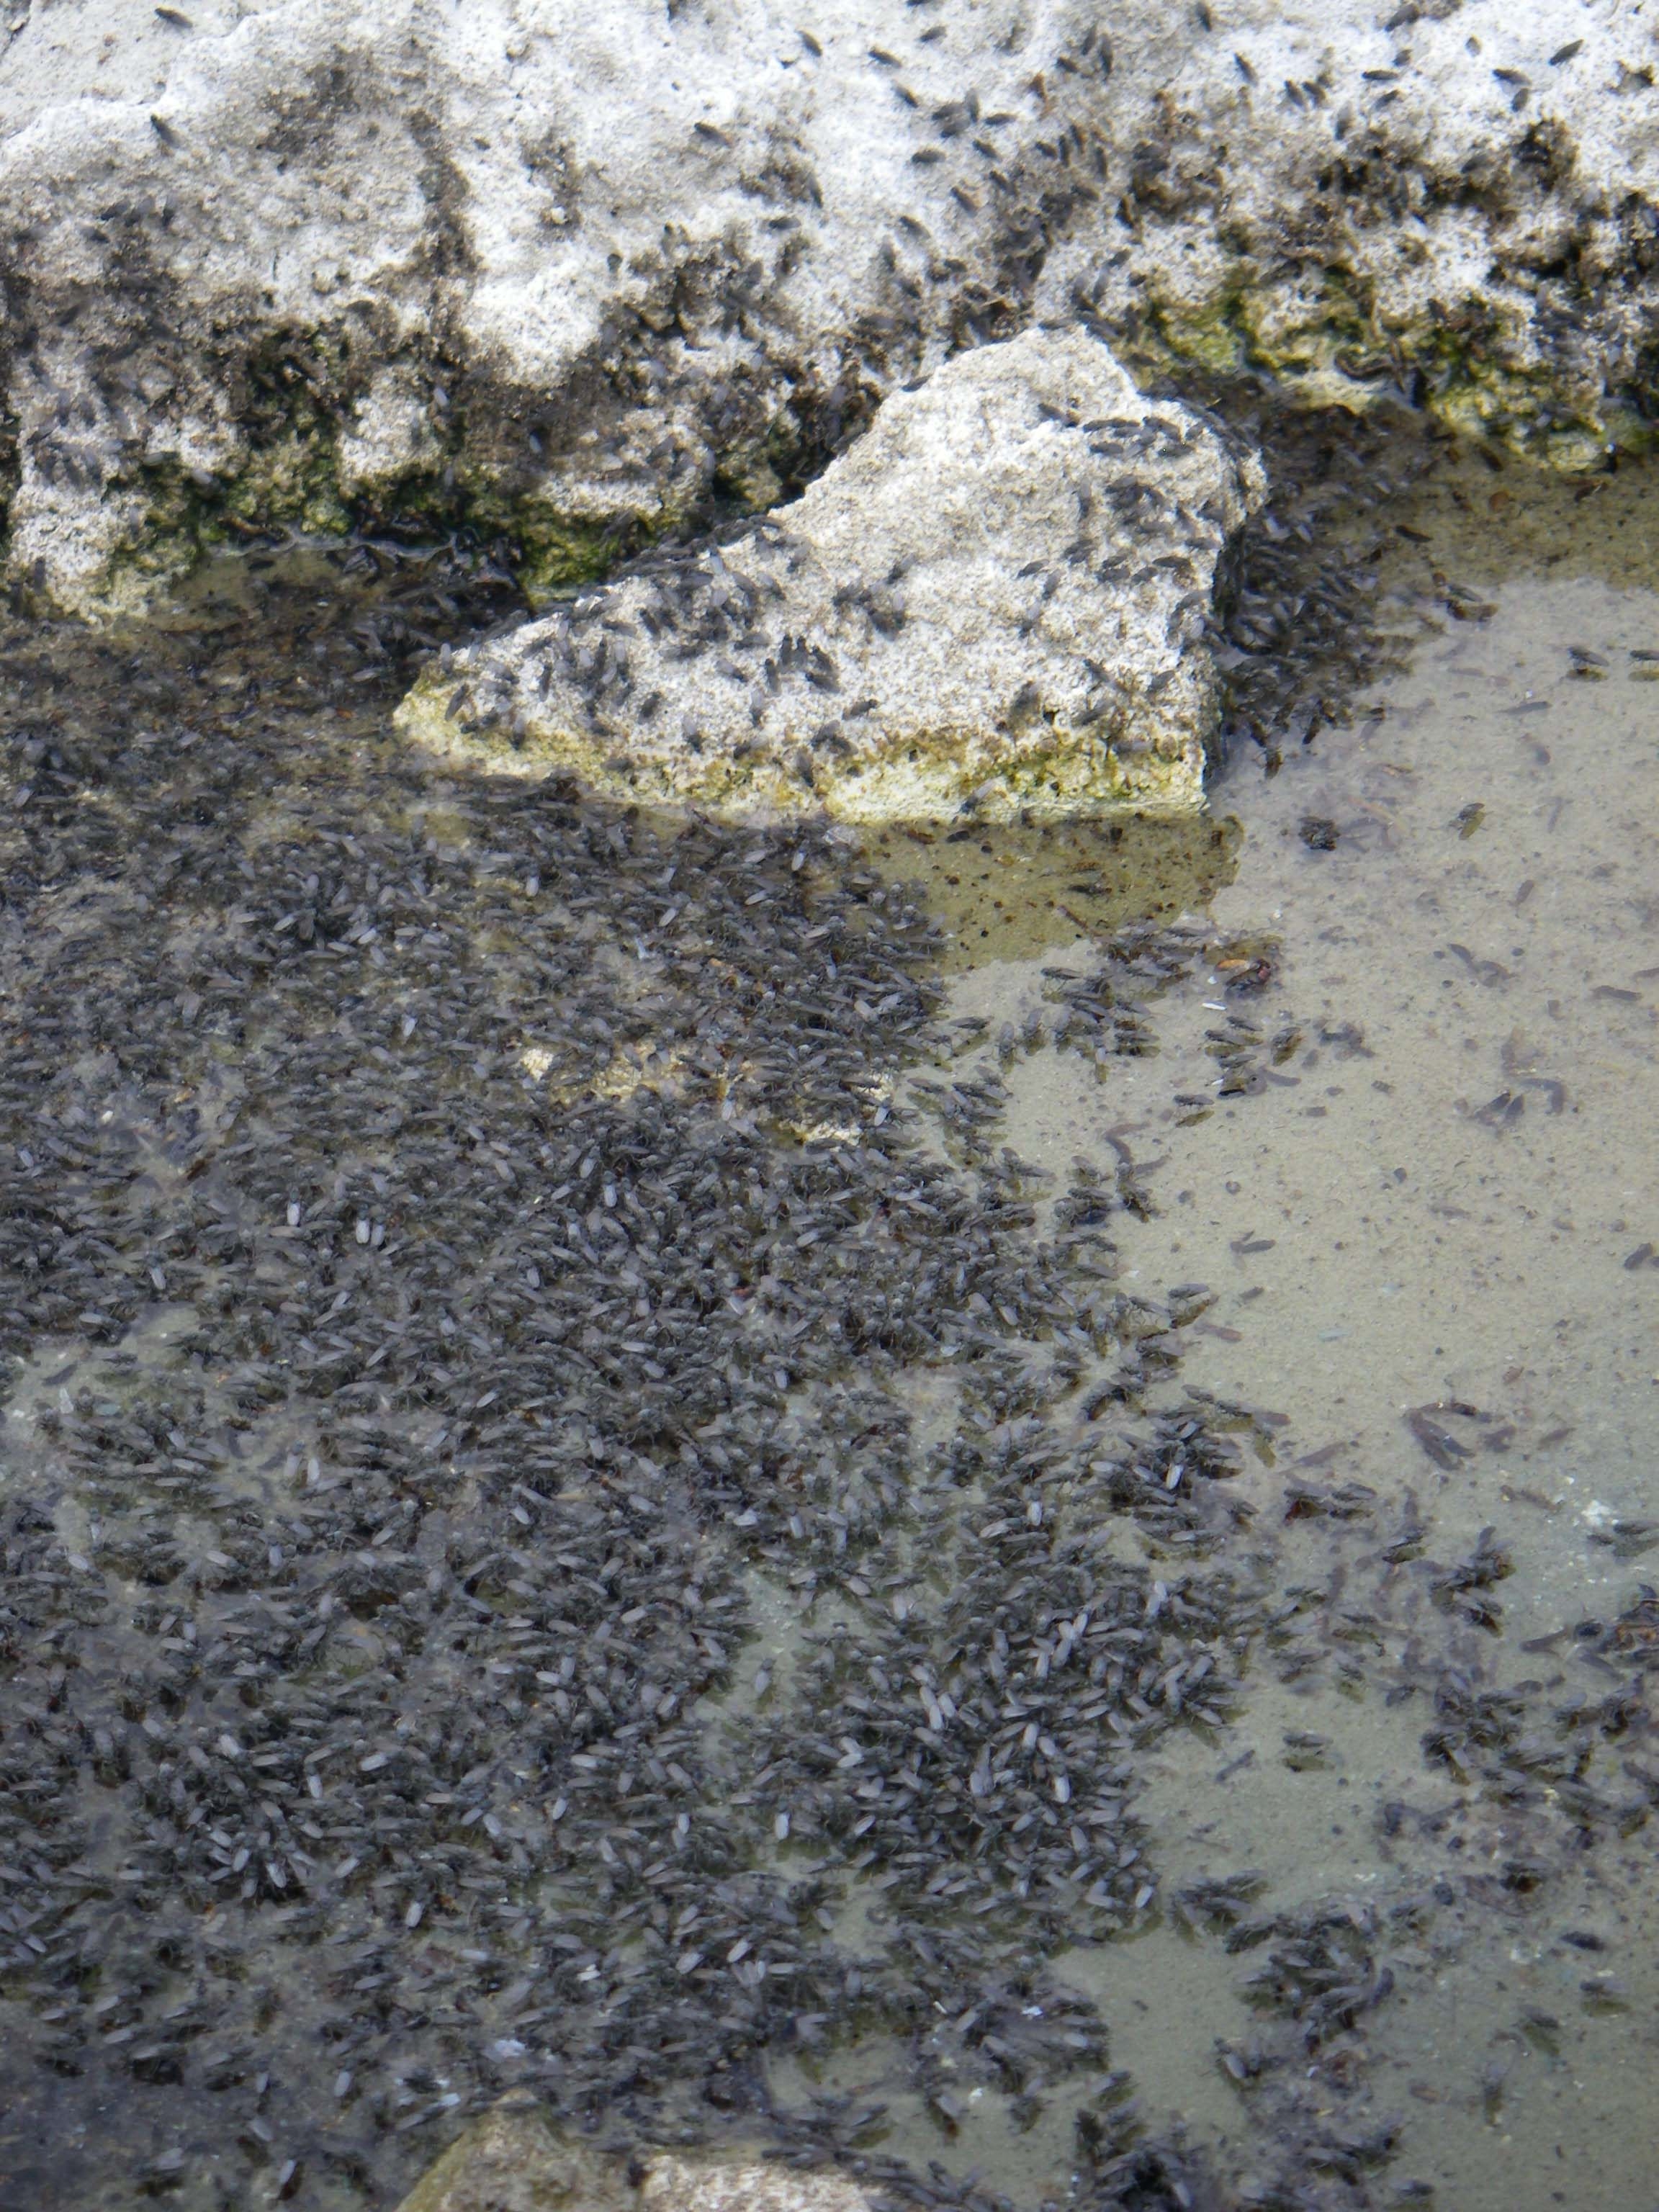 An aggregation of brine flies on a lakeshore